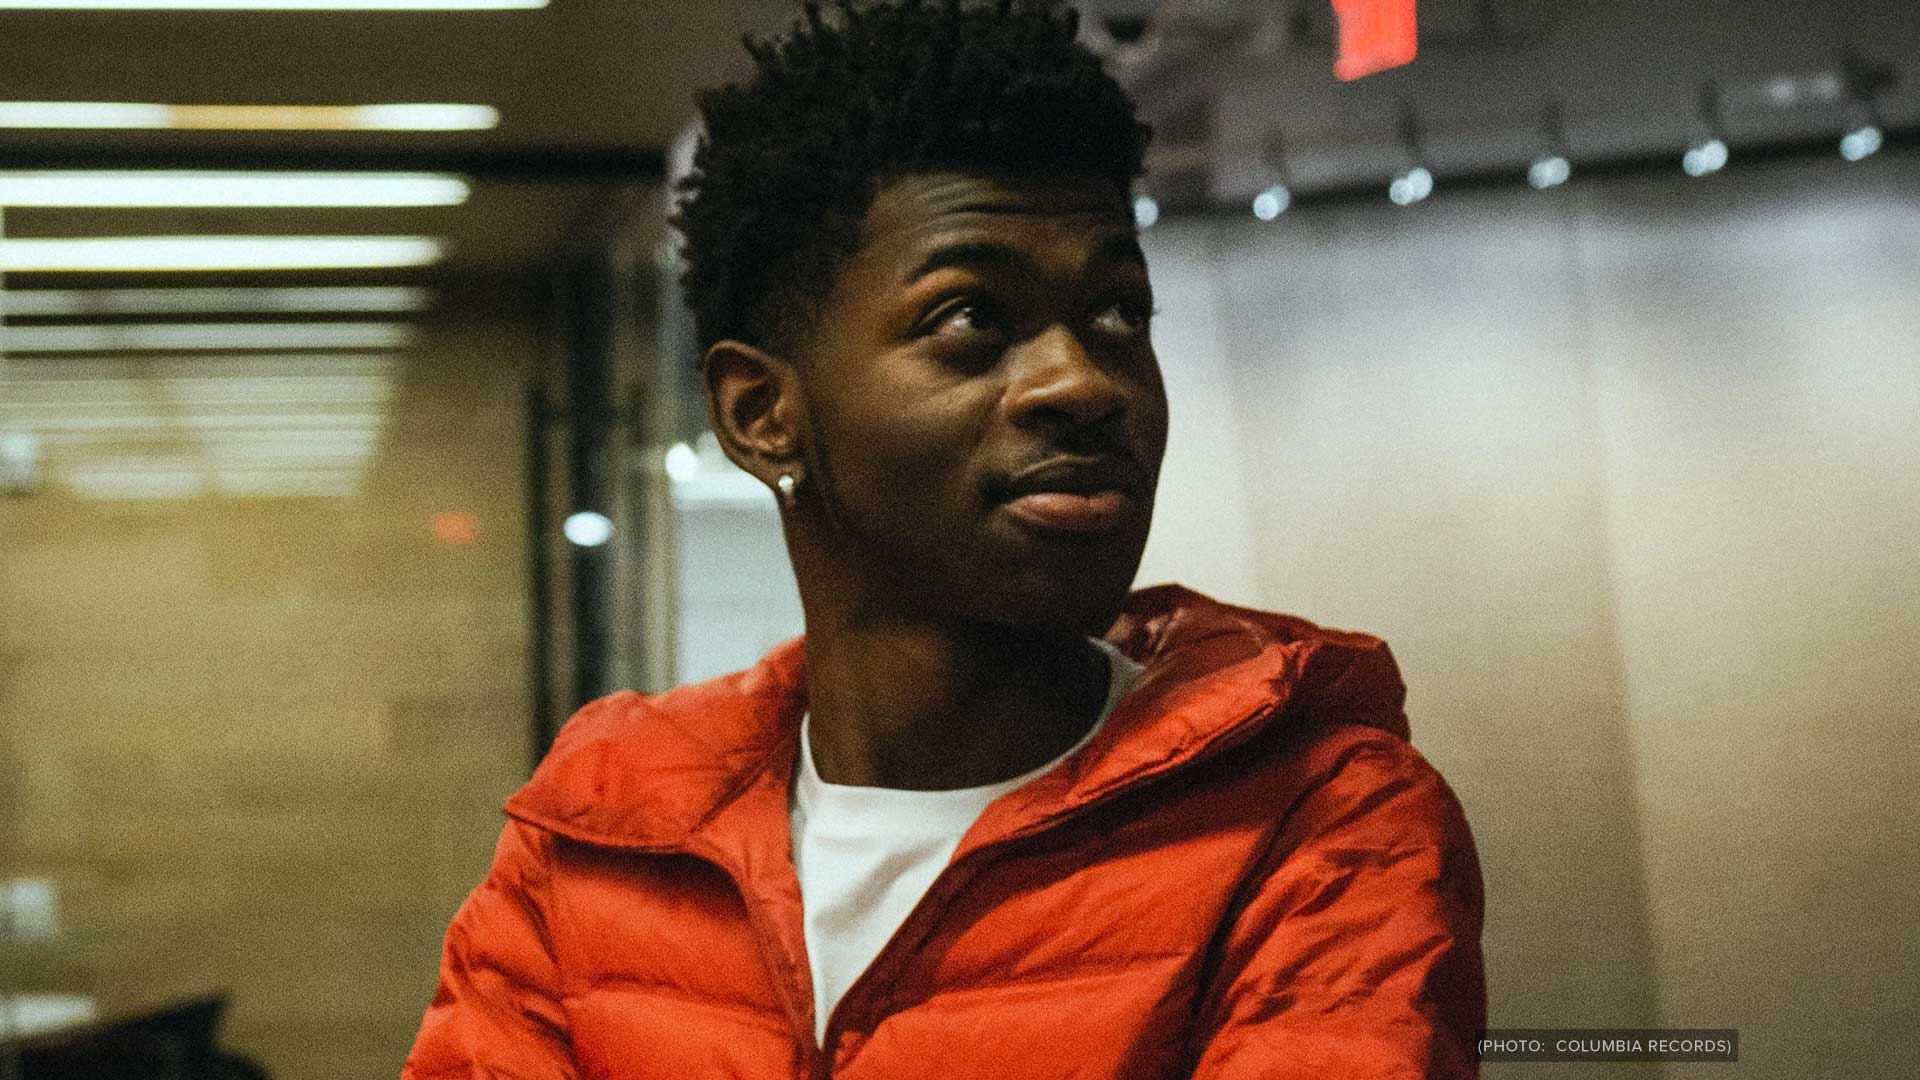 Lil Nas X Removed From Billboard Charts